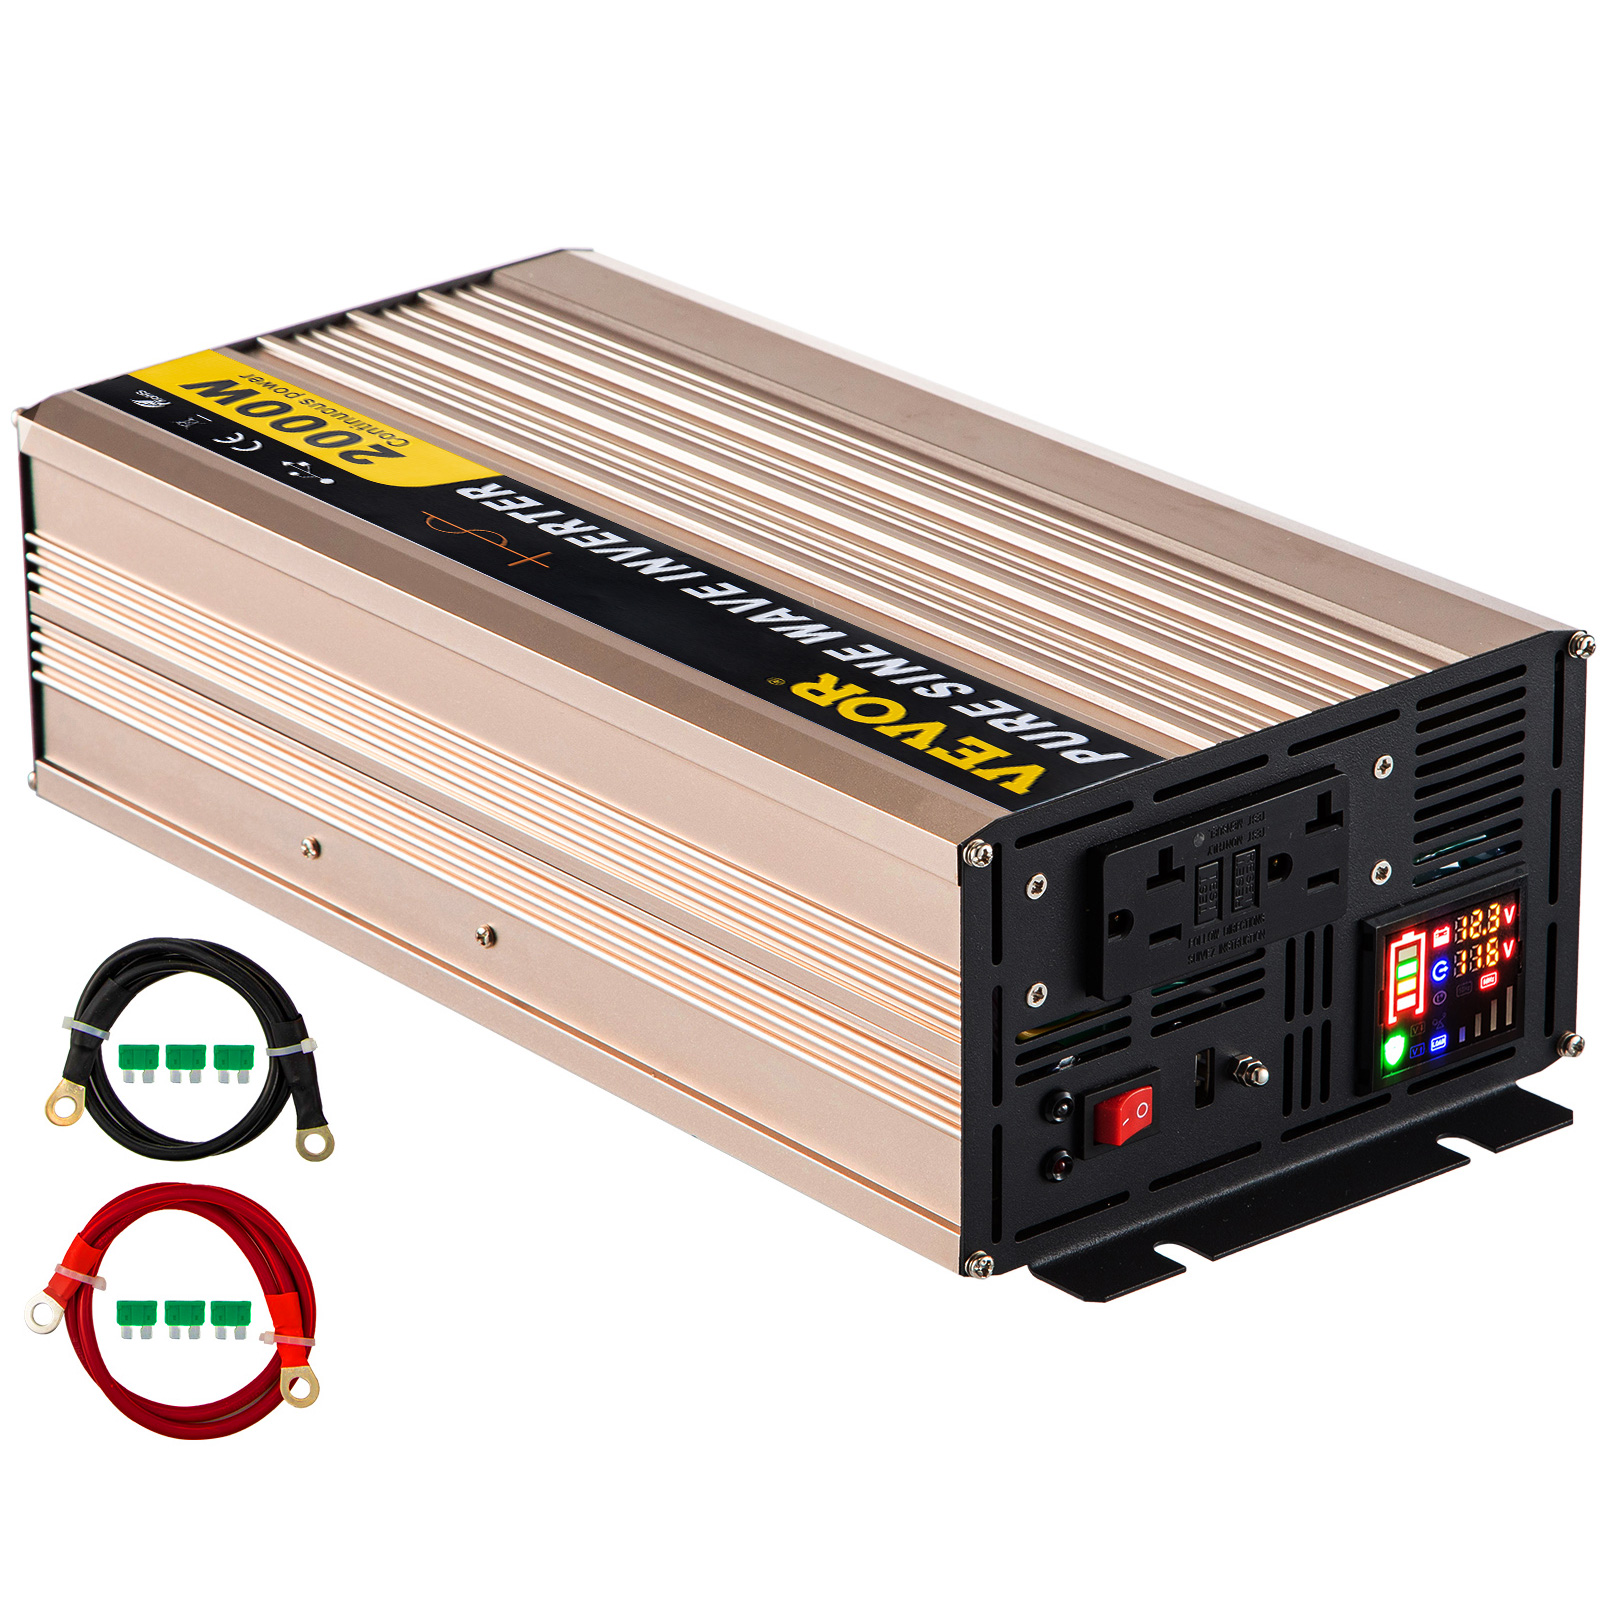 LCD Car Power Inverter 24V DC to 120V AC 60HZ 2000W Pure Sine Wave with USB Port 